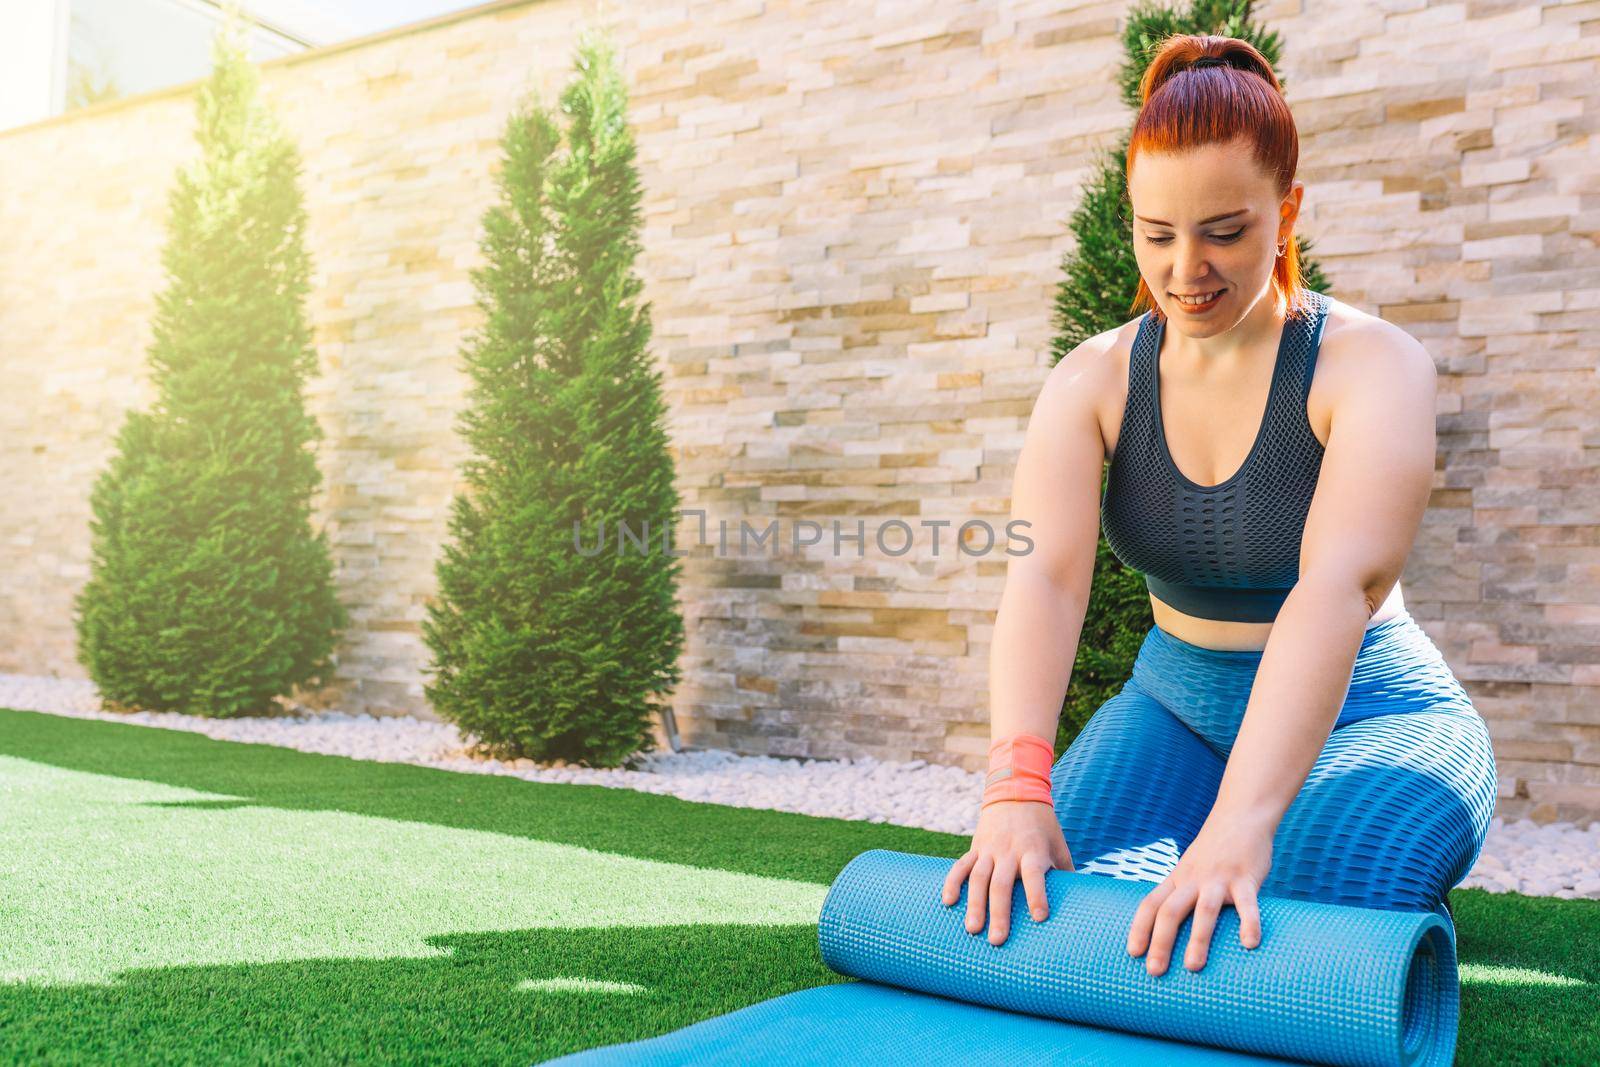 Attractive young fitness girl exercising outdoors in the garden of her home, preparing for stretching exercises. health and wellness concept.natural light in the garden.